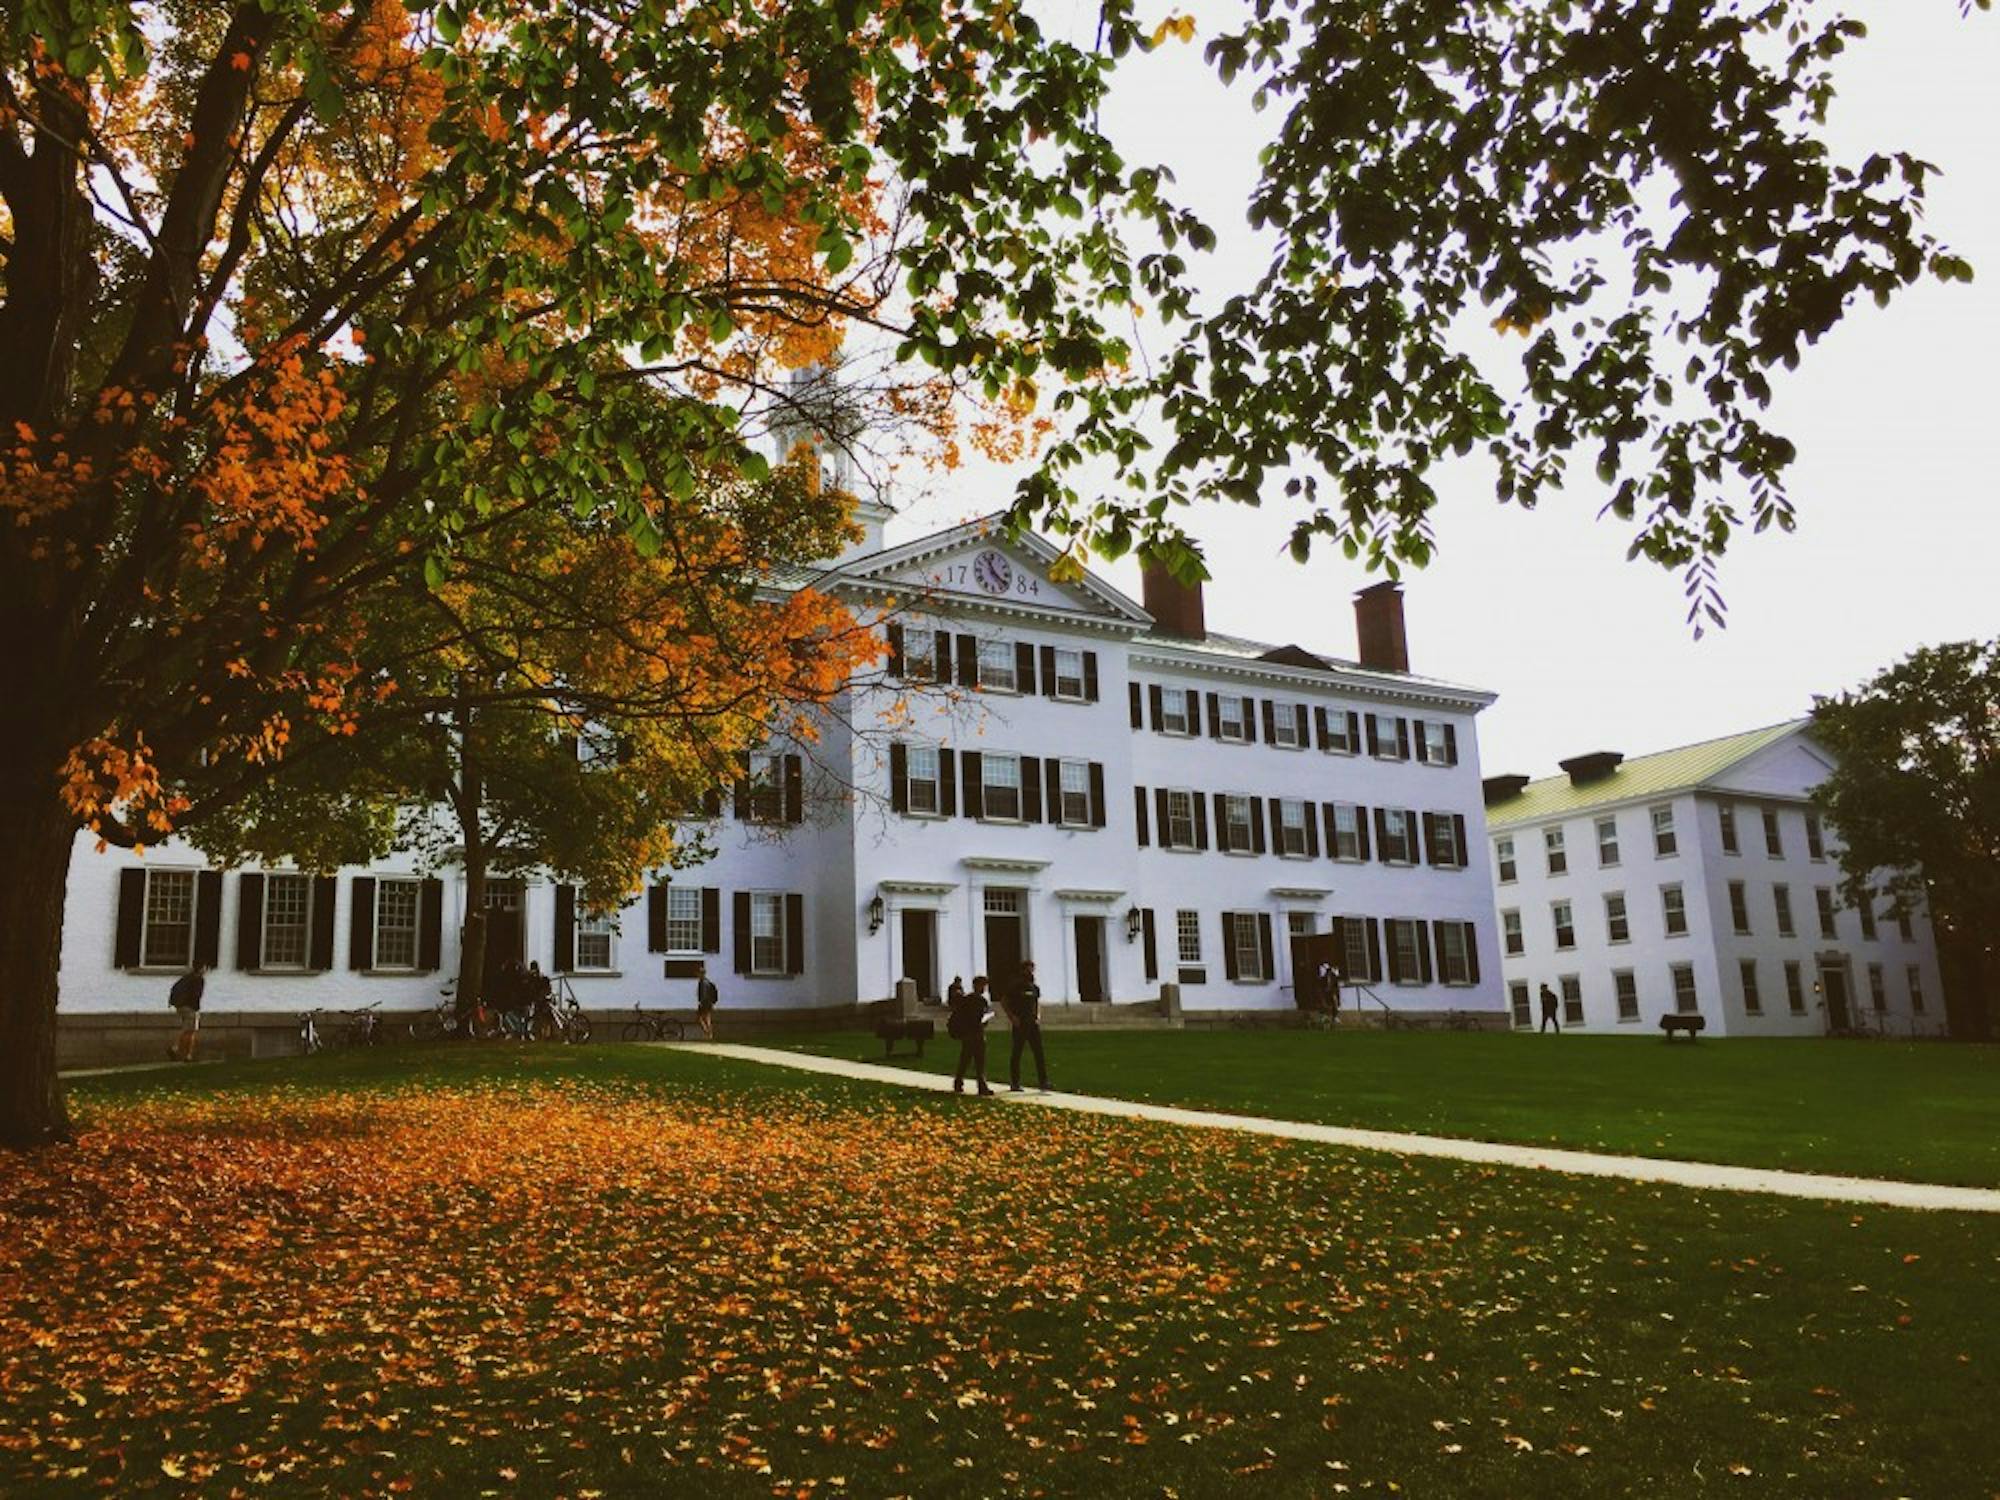 Dartmouth Hall is surrounded by fall leaves.